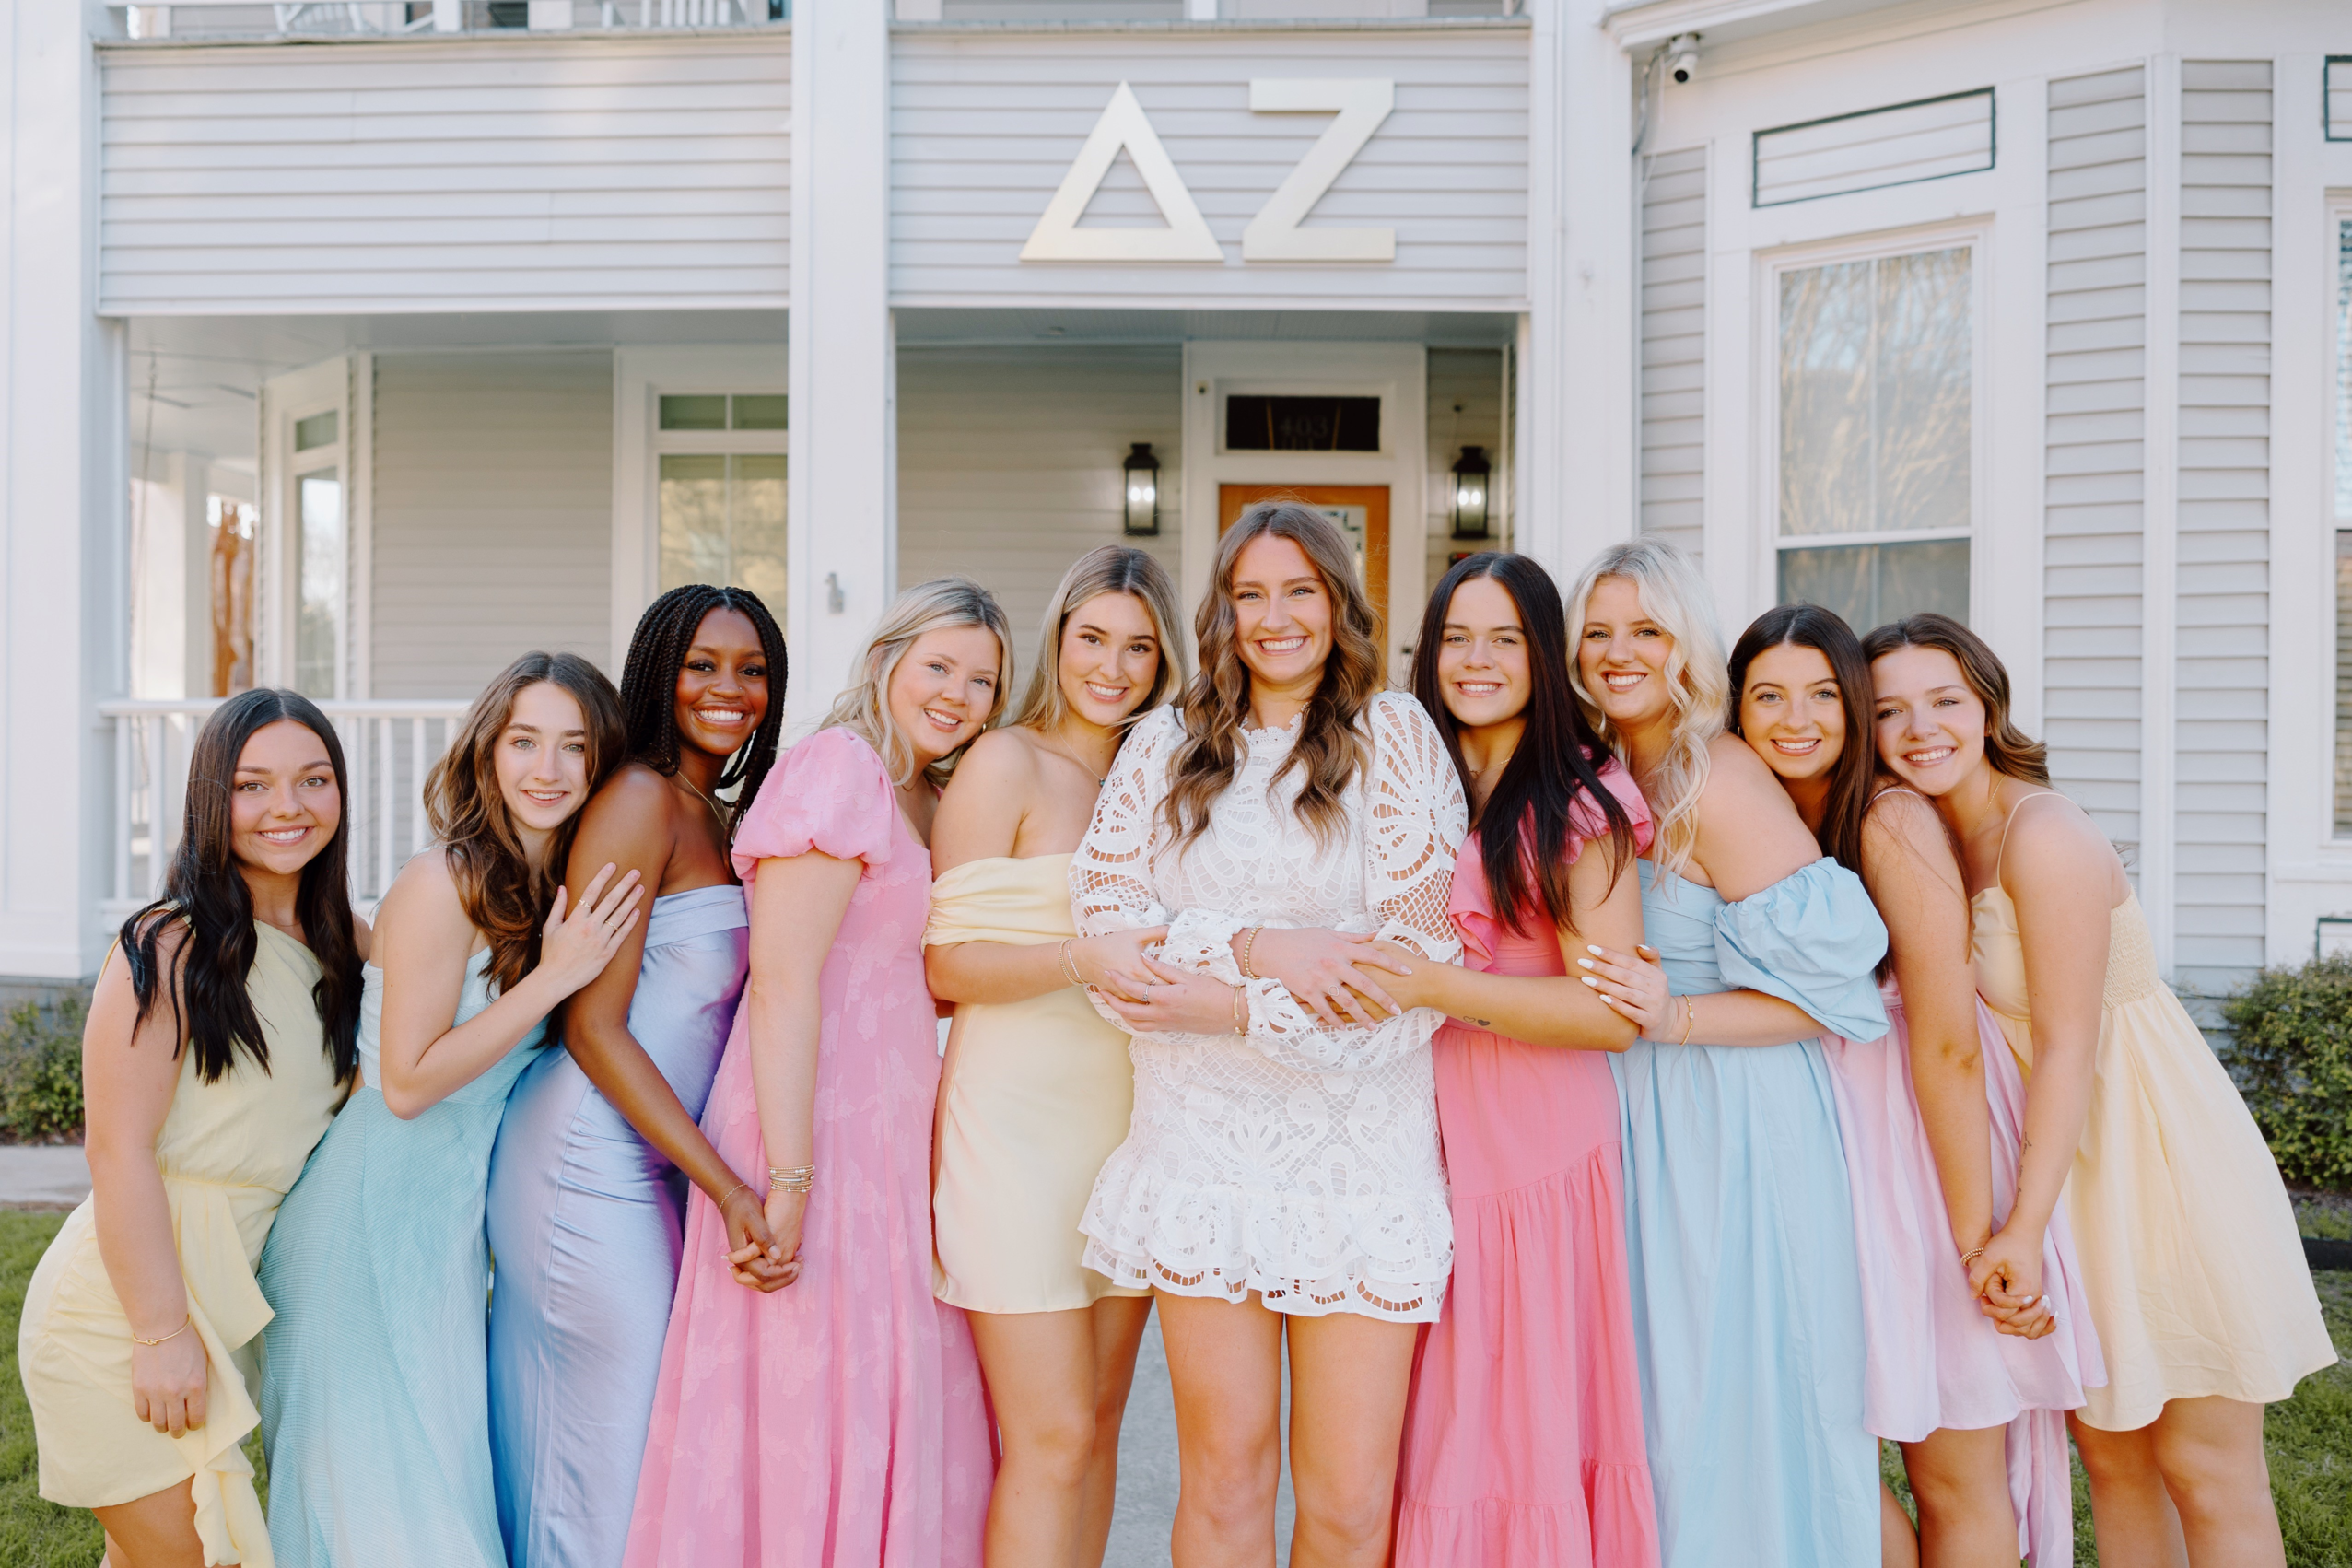 Women of Delta Zeta posing in front of their chapter house